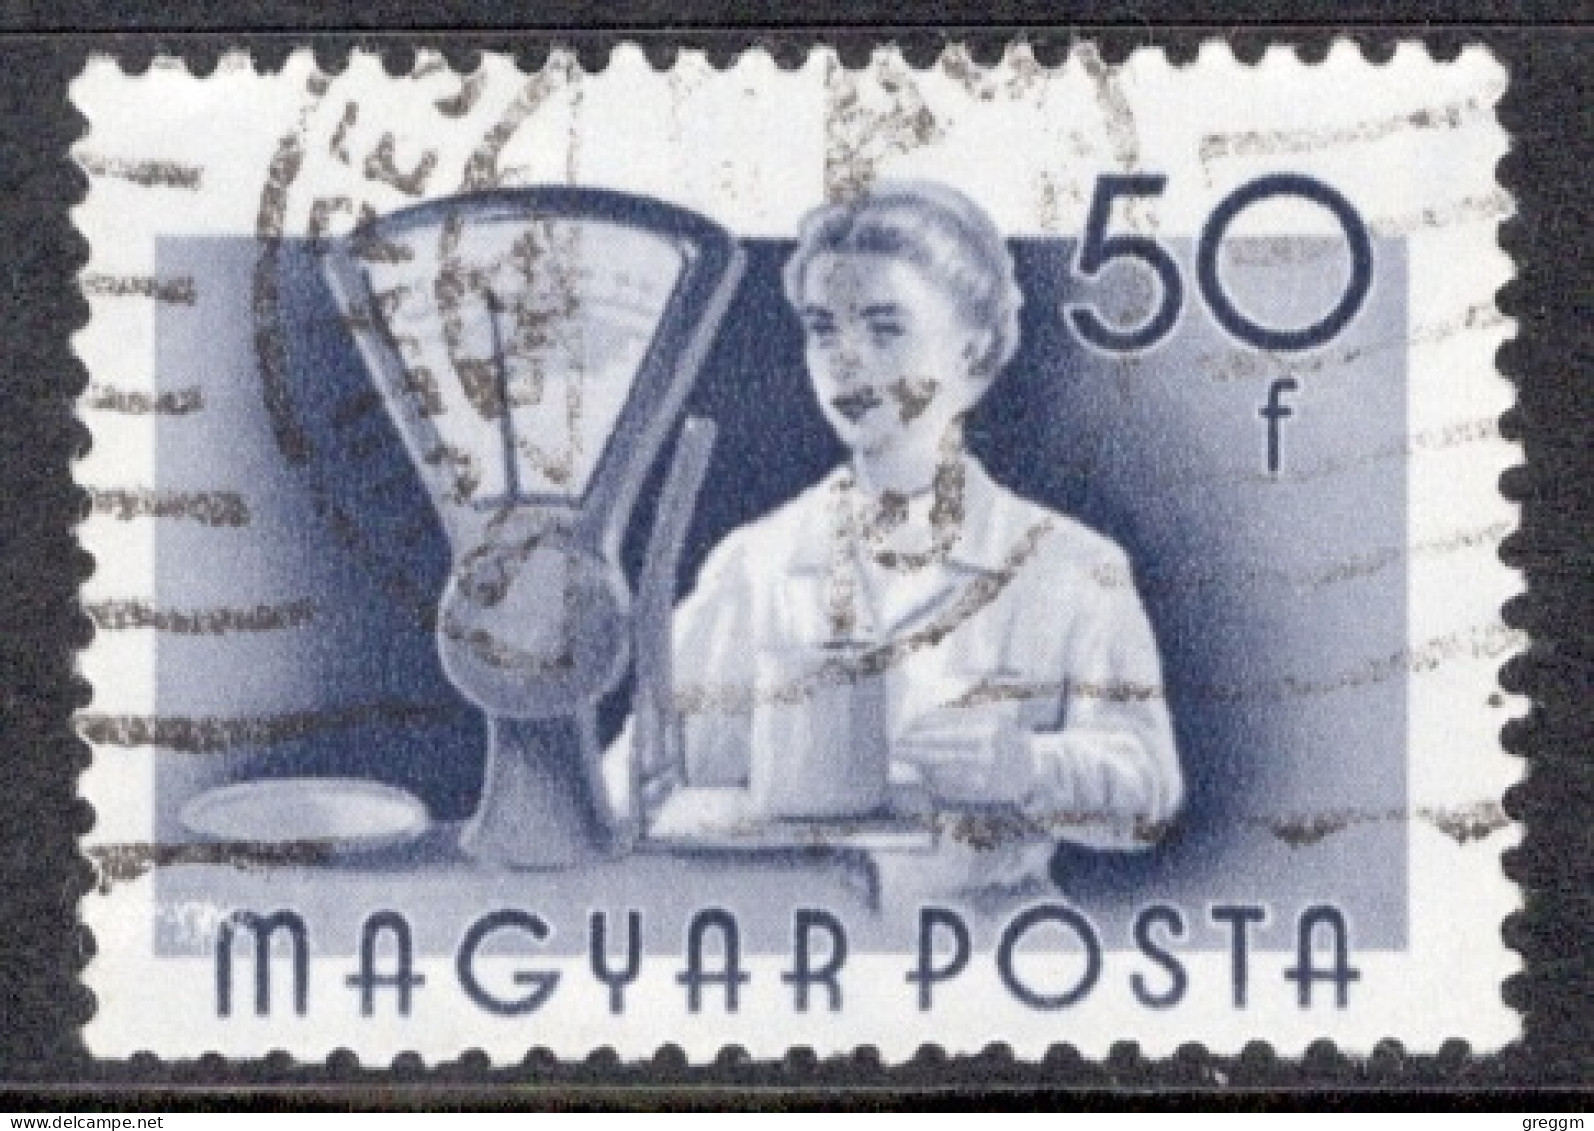 Hungary 1955 Single Stamp Celebrating Occupations In Fine Used - Used Stamps